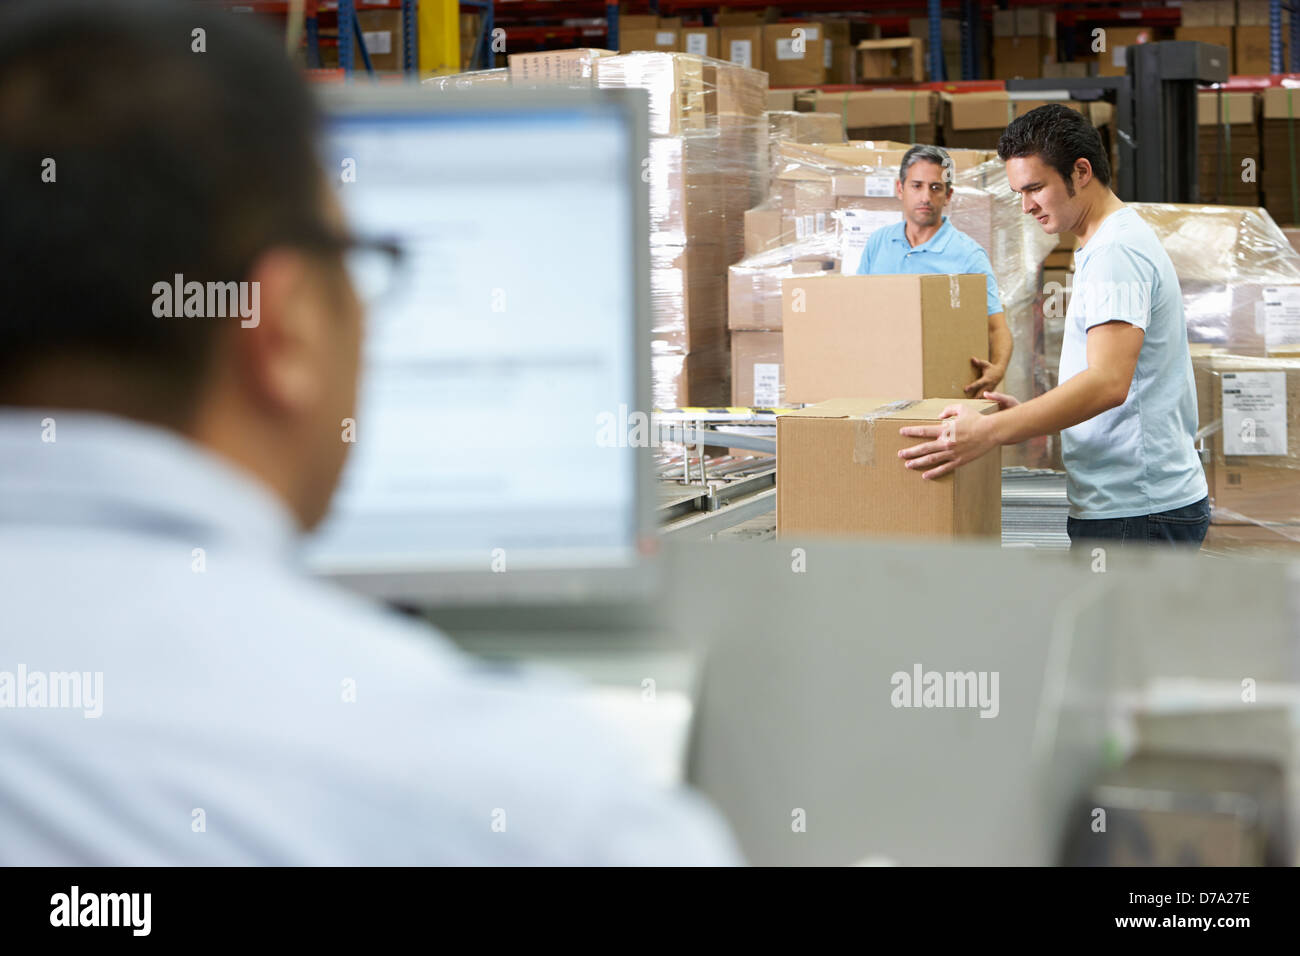 Person At Computer Terminal In Distribution Warehouse Stock Photo